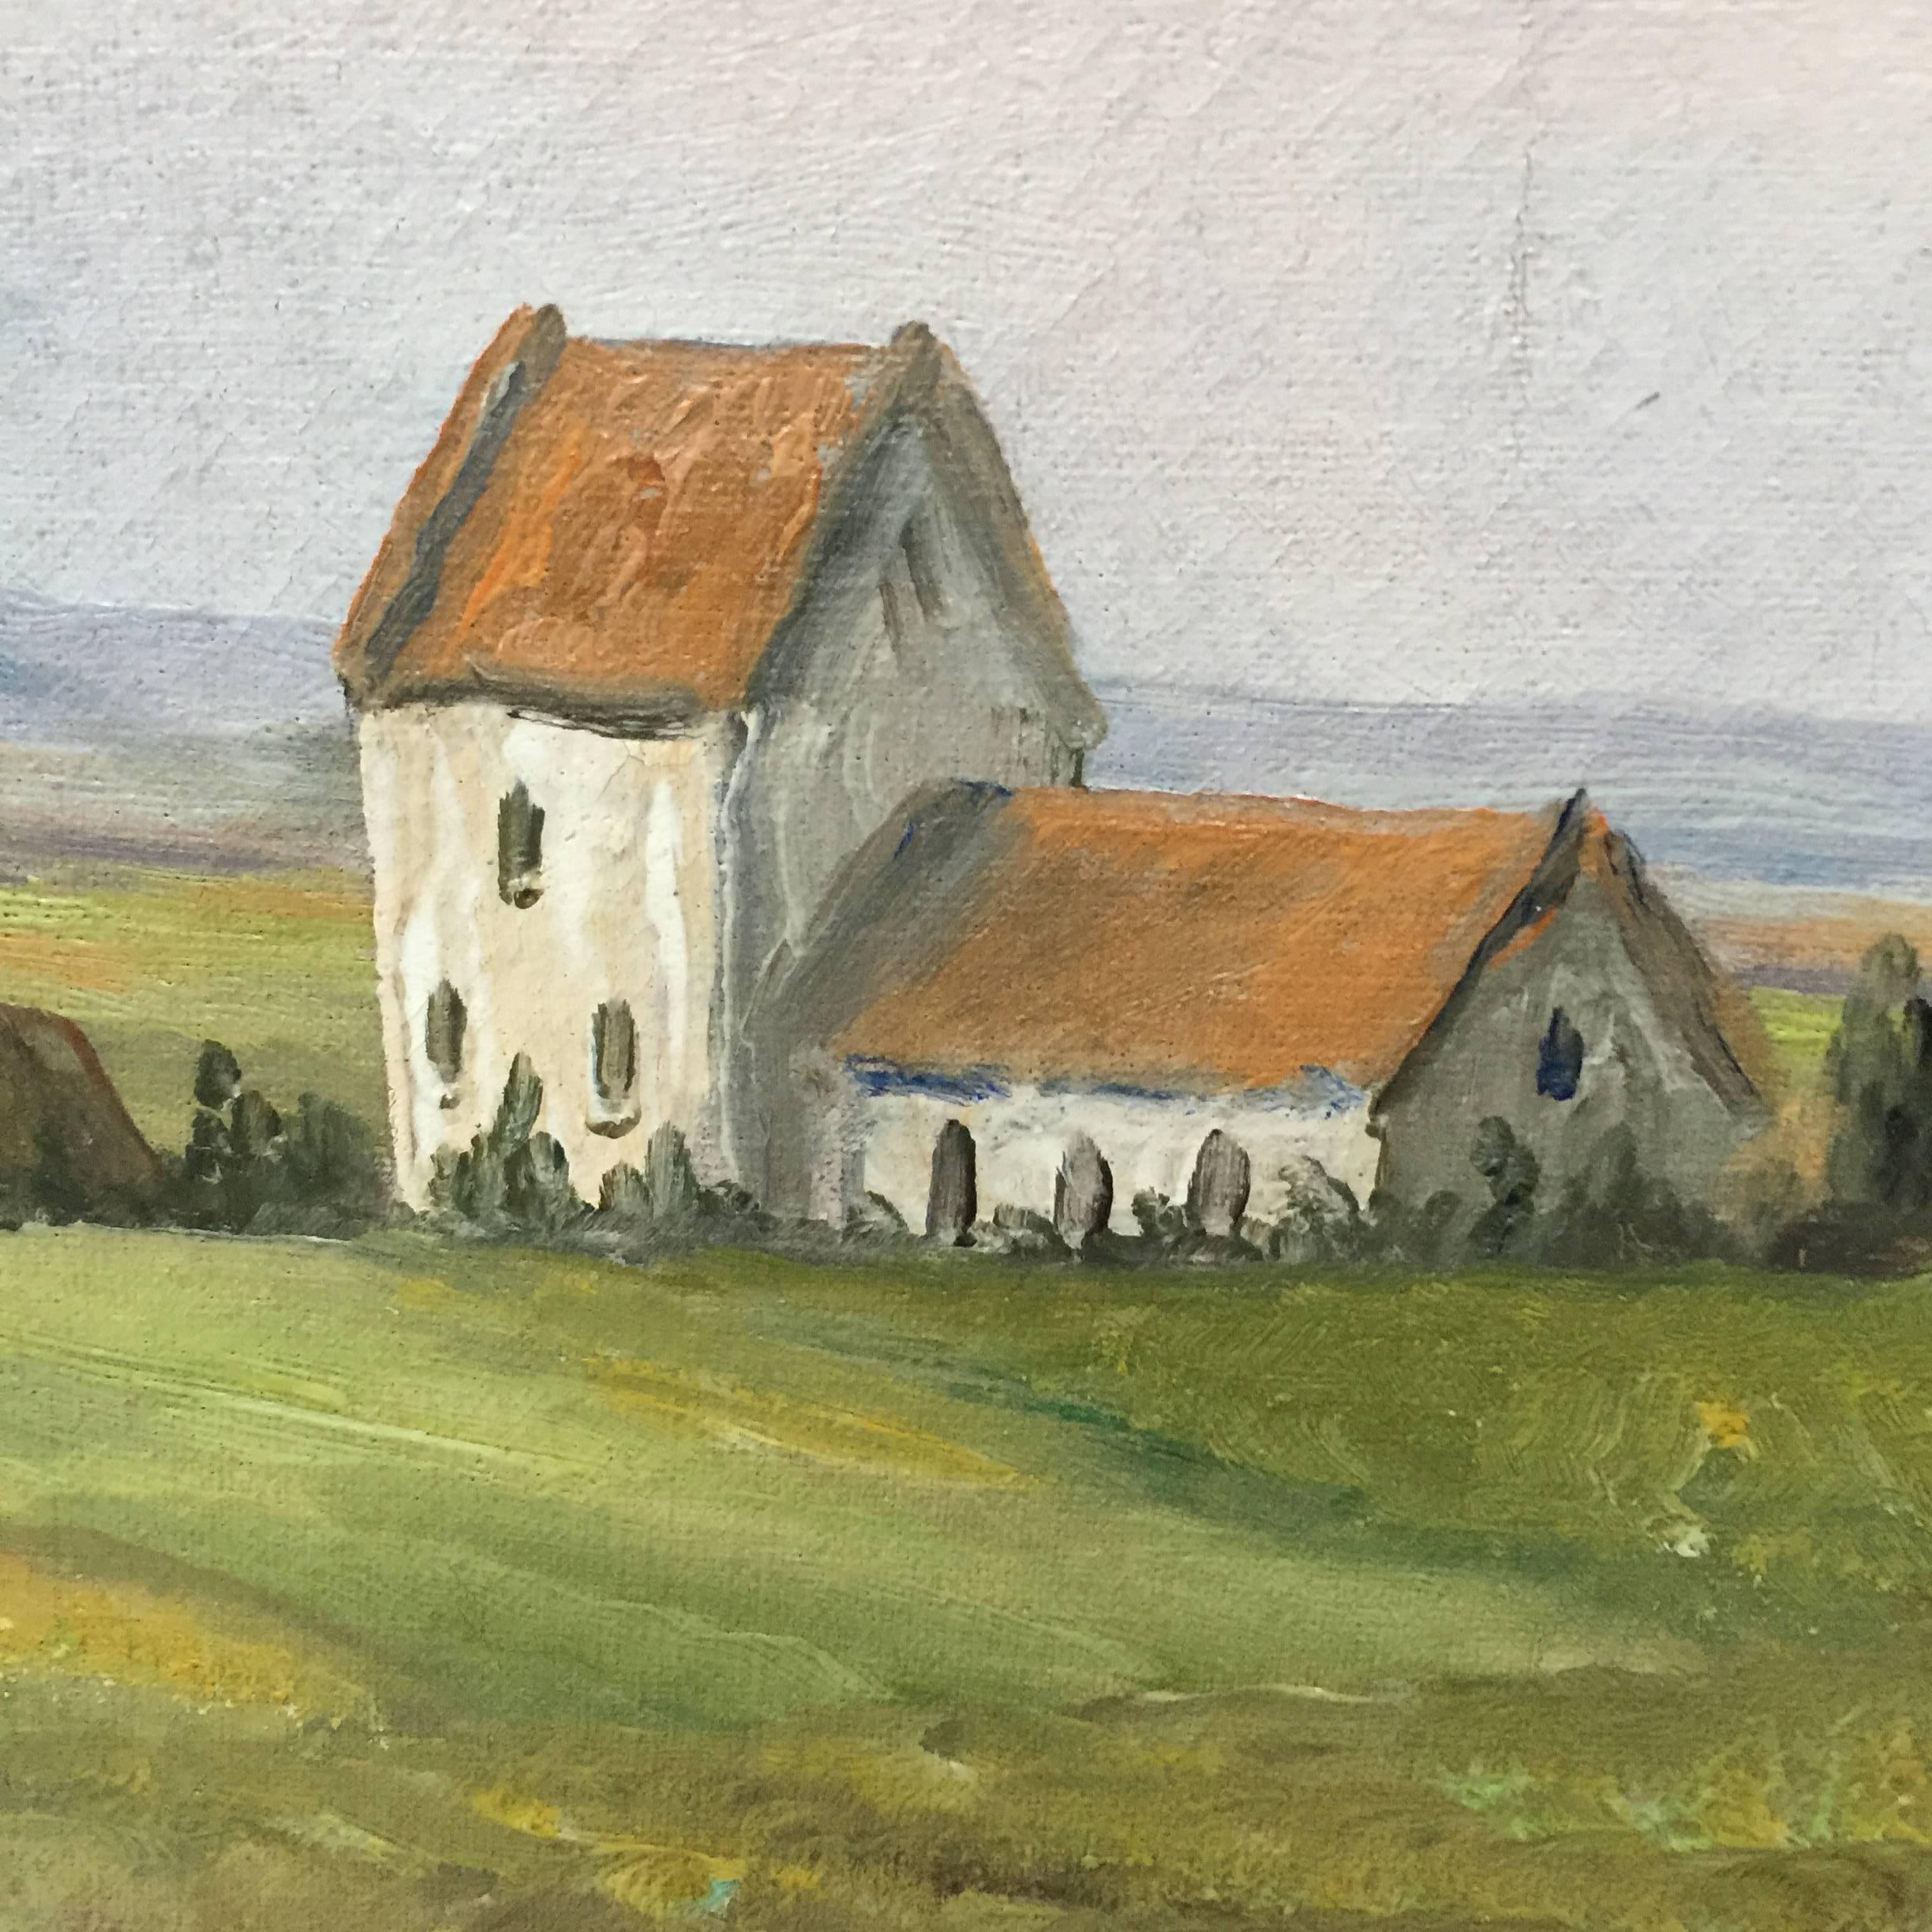 Painting of a Danish countryhouse. The motive is from around Næstved and Karrebæk in the main Danish island of Sjælland, close to Copenhagen.
Unknown artist.